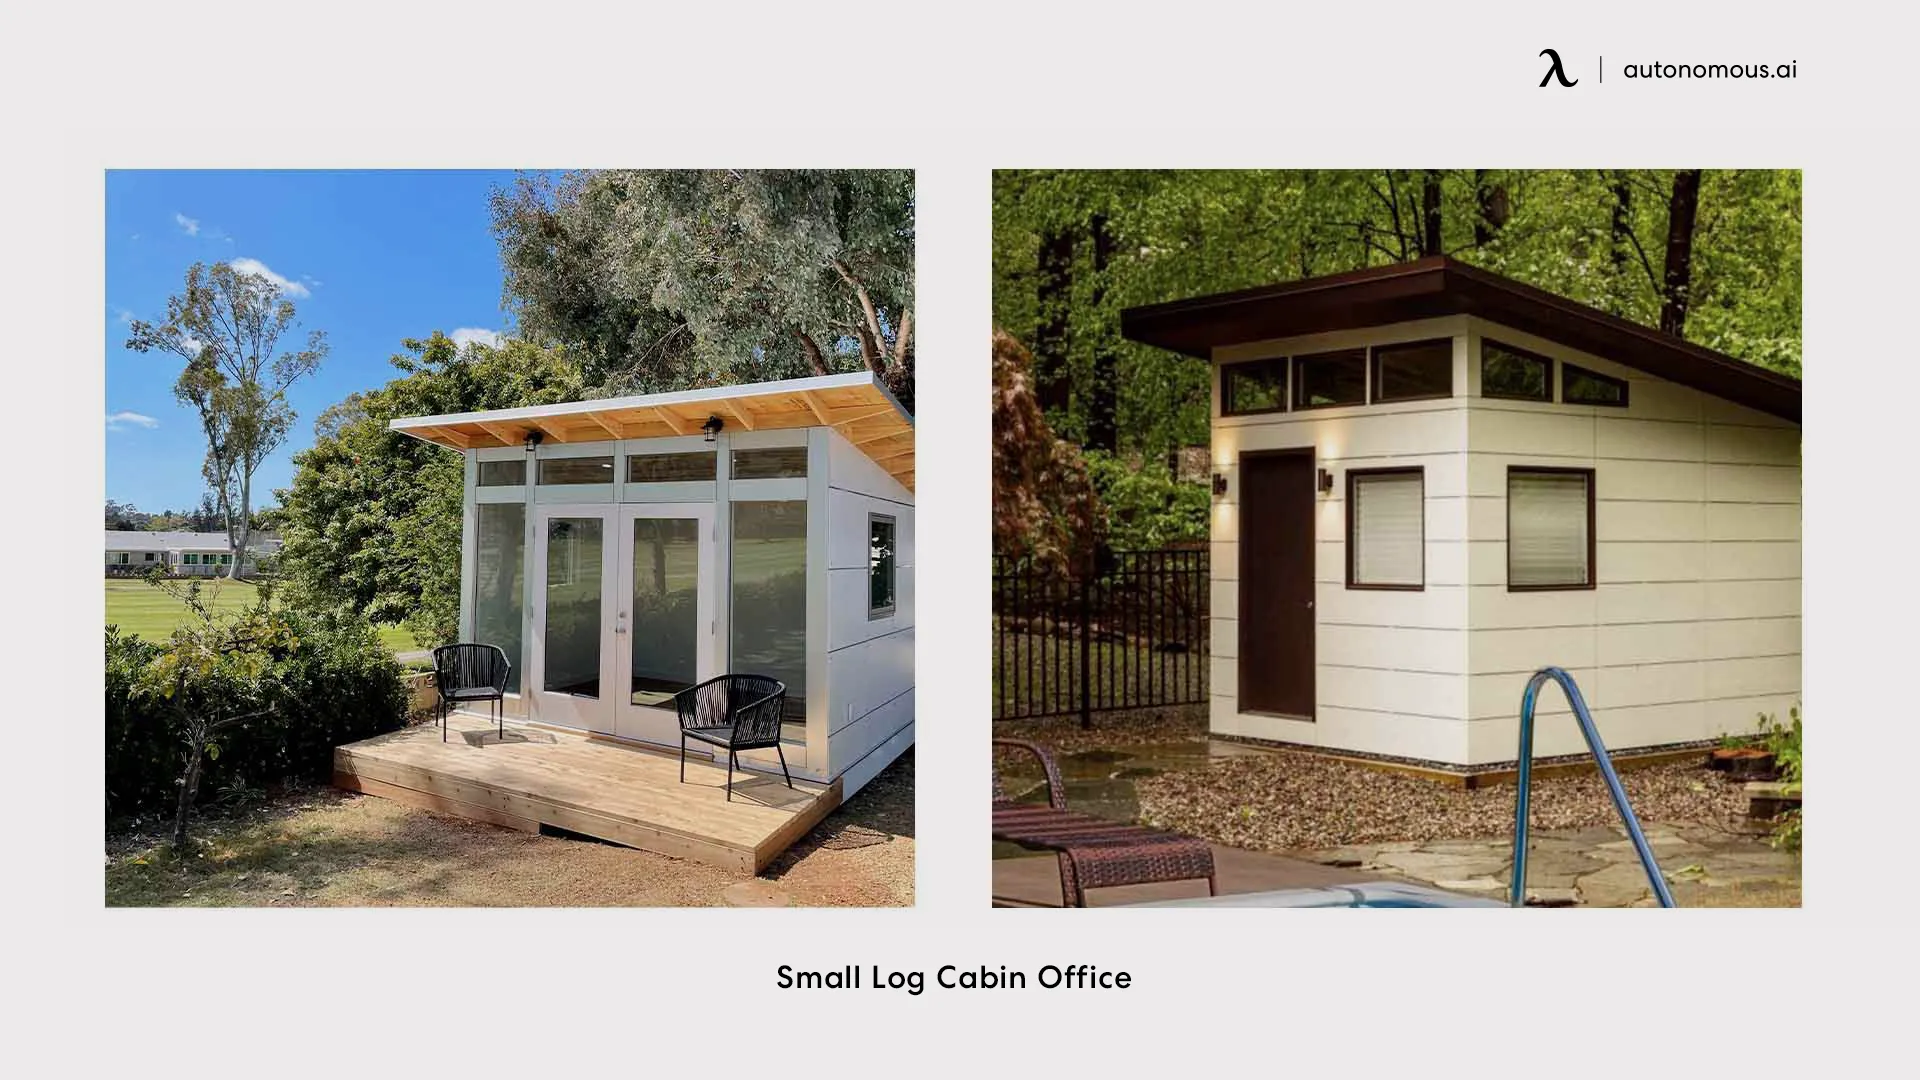 Small Log Cabin Office